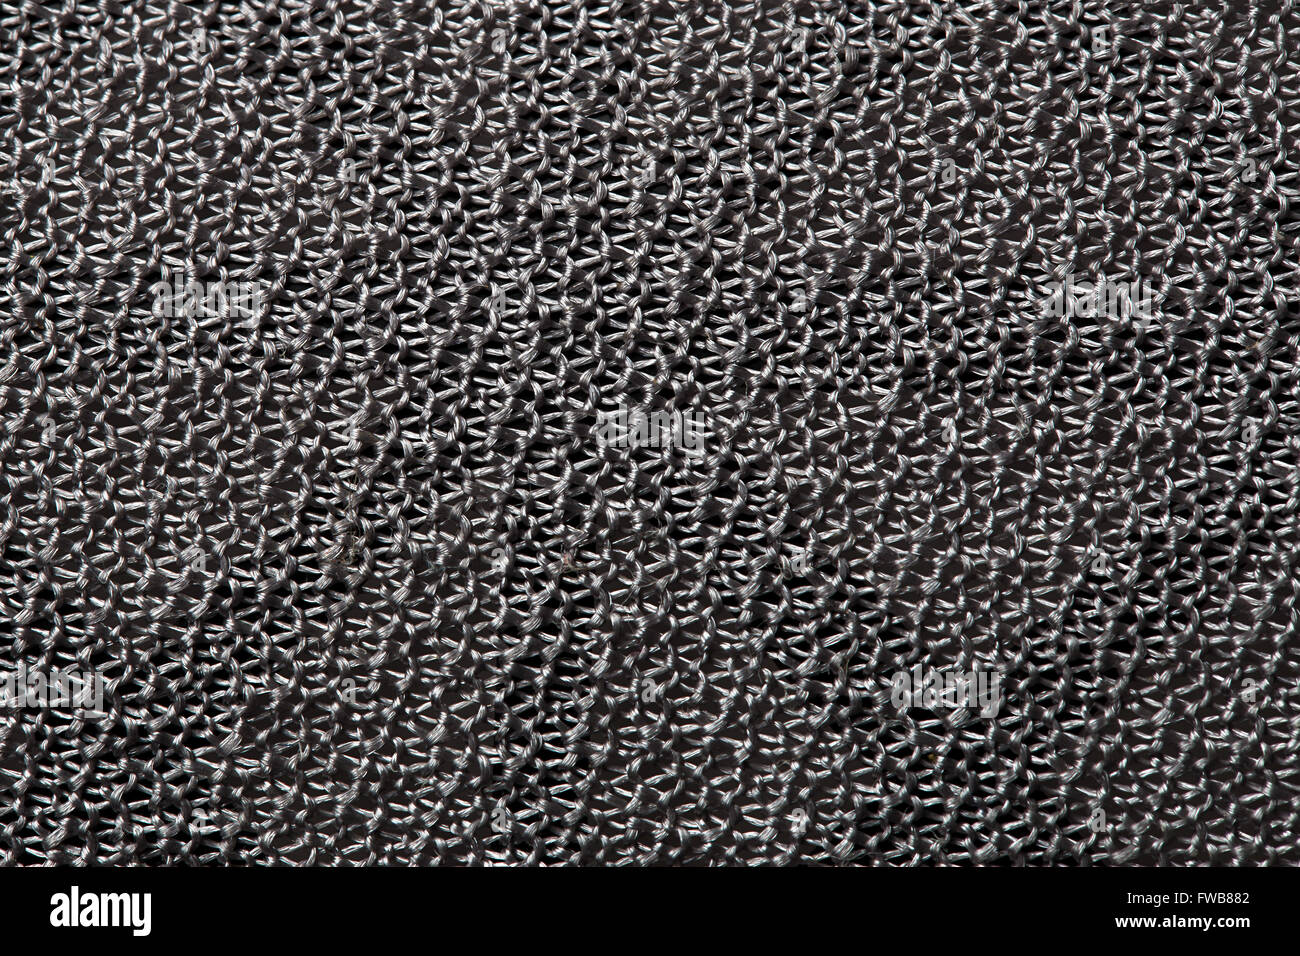 texture background of the gray mesh material, like a metal chain mail Stock Photo